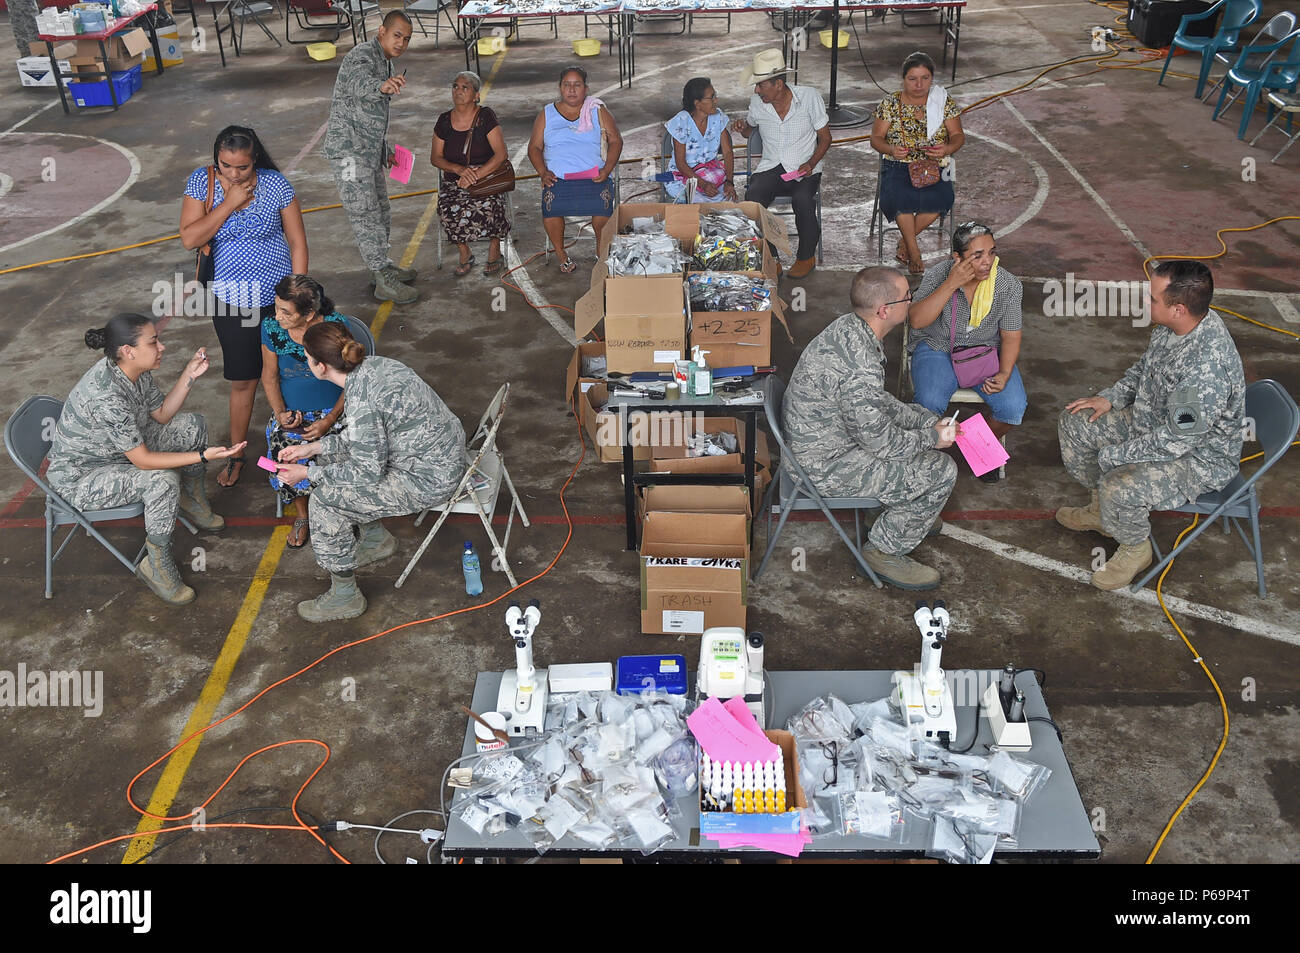 LA BLANCA, Guatemala – U.S. Air Force optometrists and optometry technicians provide eye examinations for Municipality of La Blanca residents at the medical readiness training exercise in La Blanca May 28, 2016, during Exercise BEYOND THE HORIZON 2016 GUATEMALA. Approximately one third of the MEDRETE patients have received services from the optometrists and optometry technicians. (U.S. Air Force photo by Senior Airman Dillon Davis/Released) Stock Photo